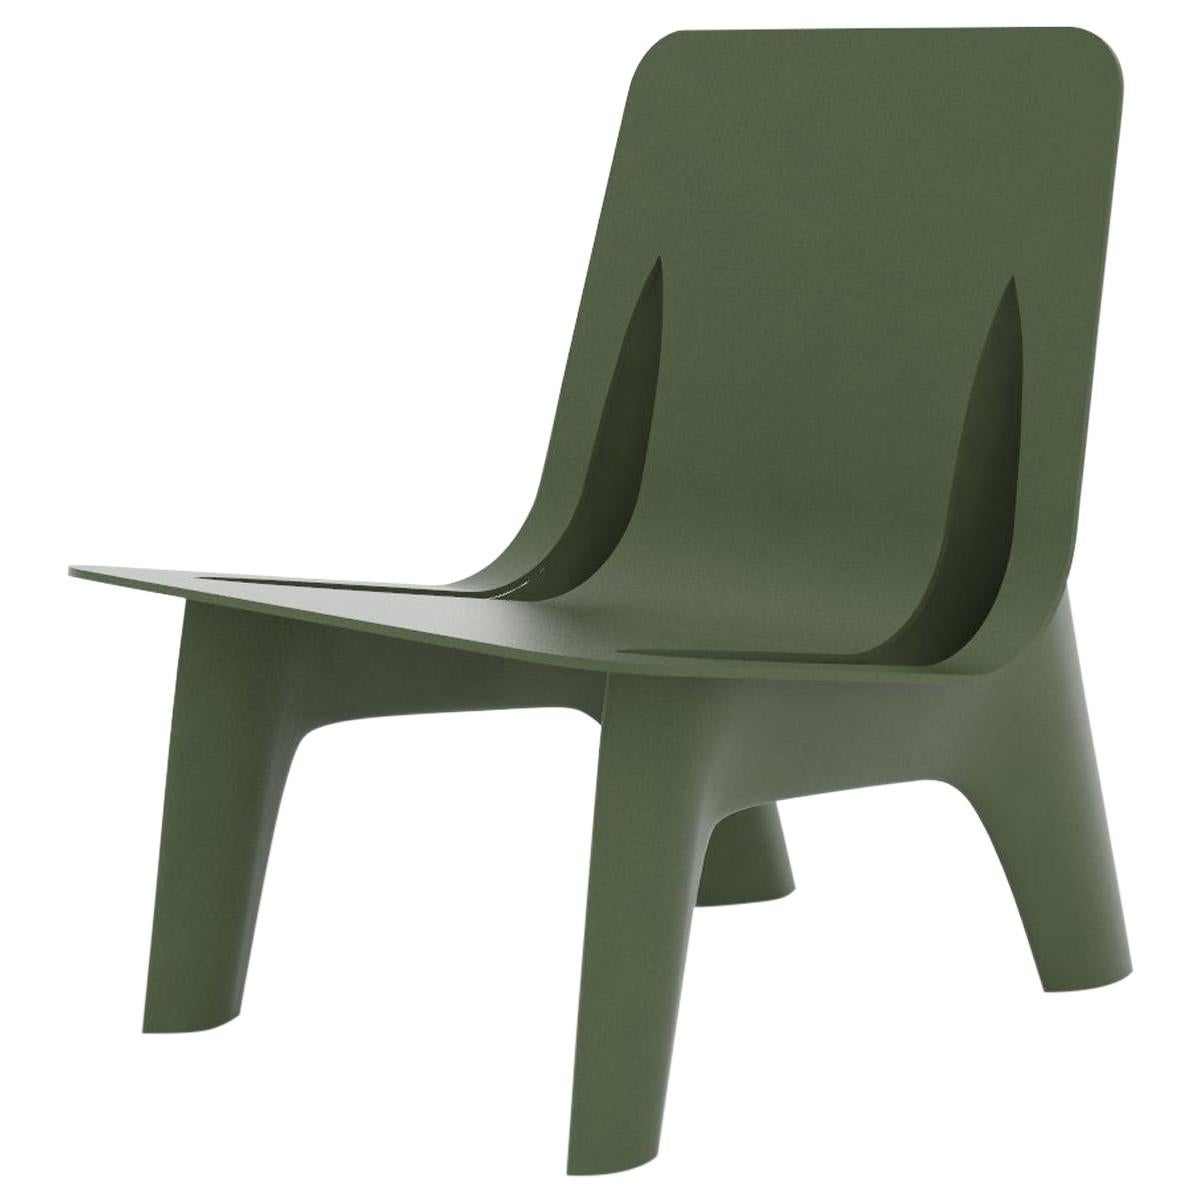 J-Chair Lounge Polished Olive Green Color Carbon Steel Seating by Zieta